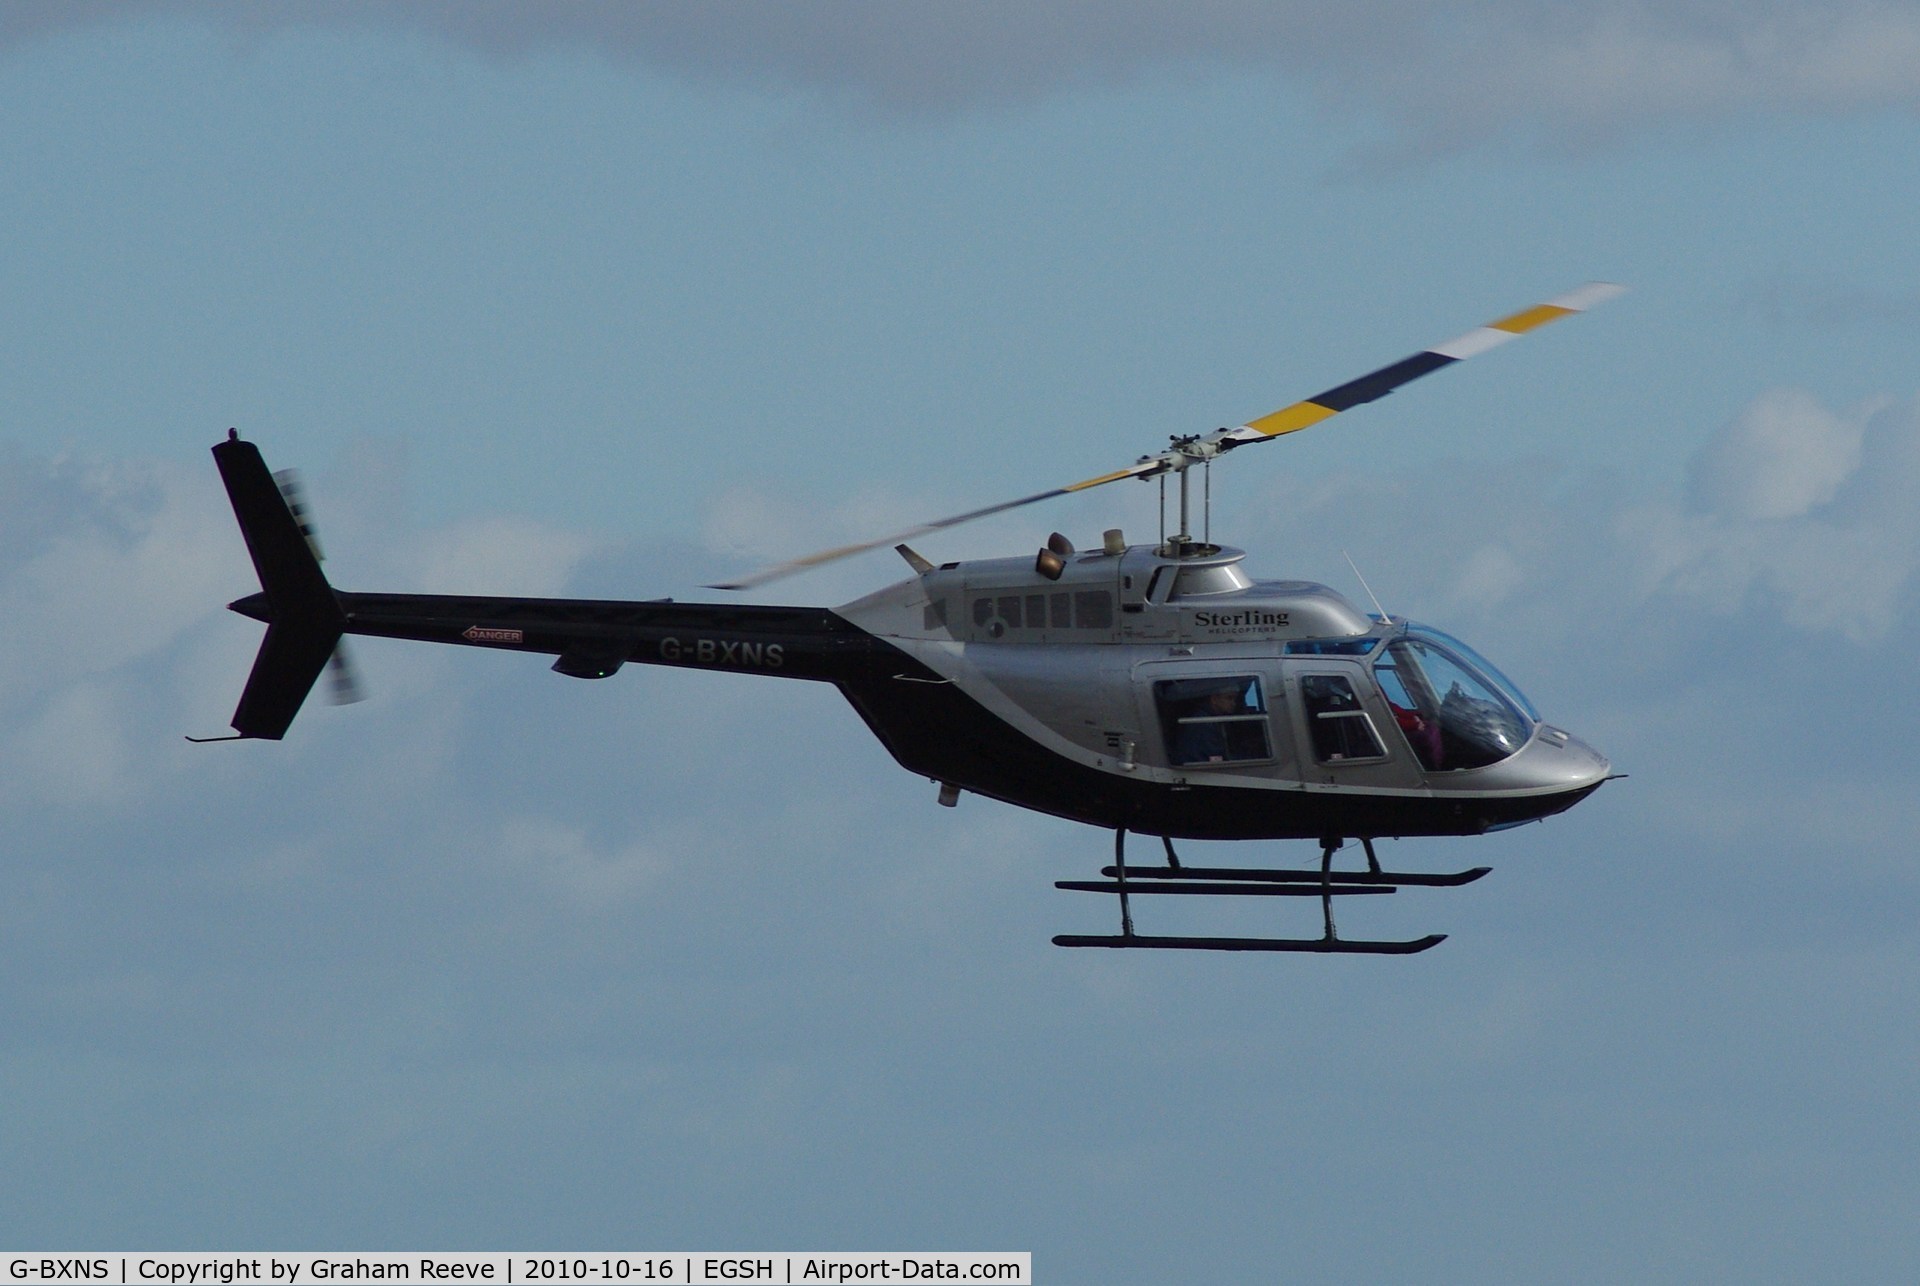 G-BXNS, 1977 Bell 206B JetRanger III C/N 2385, About to land at Norwich.